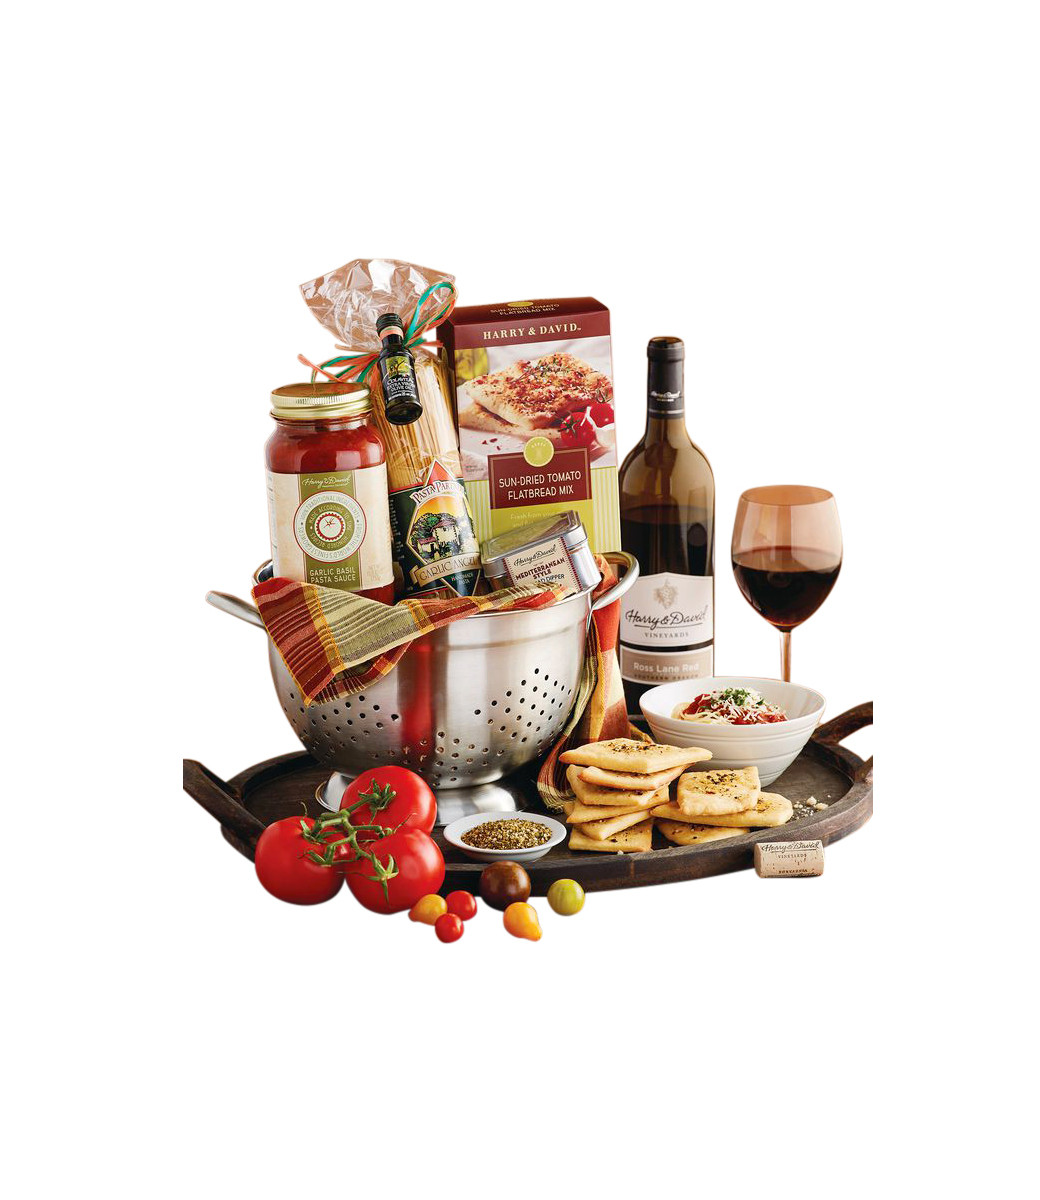 Pasta Basket Gift Ideas
 The top 22 Ideas About Pasta Gift Basket Ideas Home